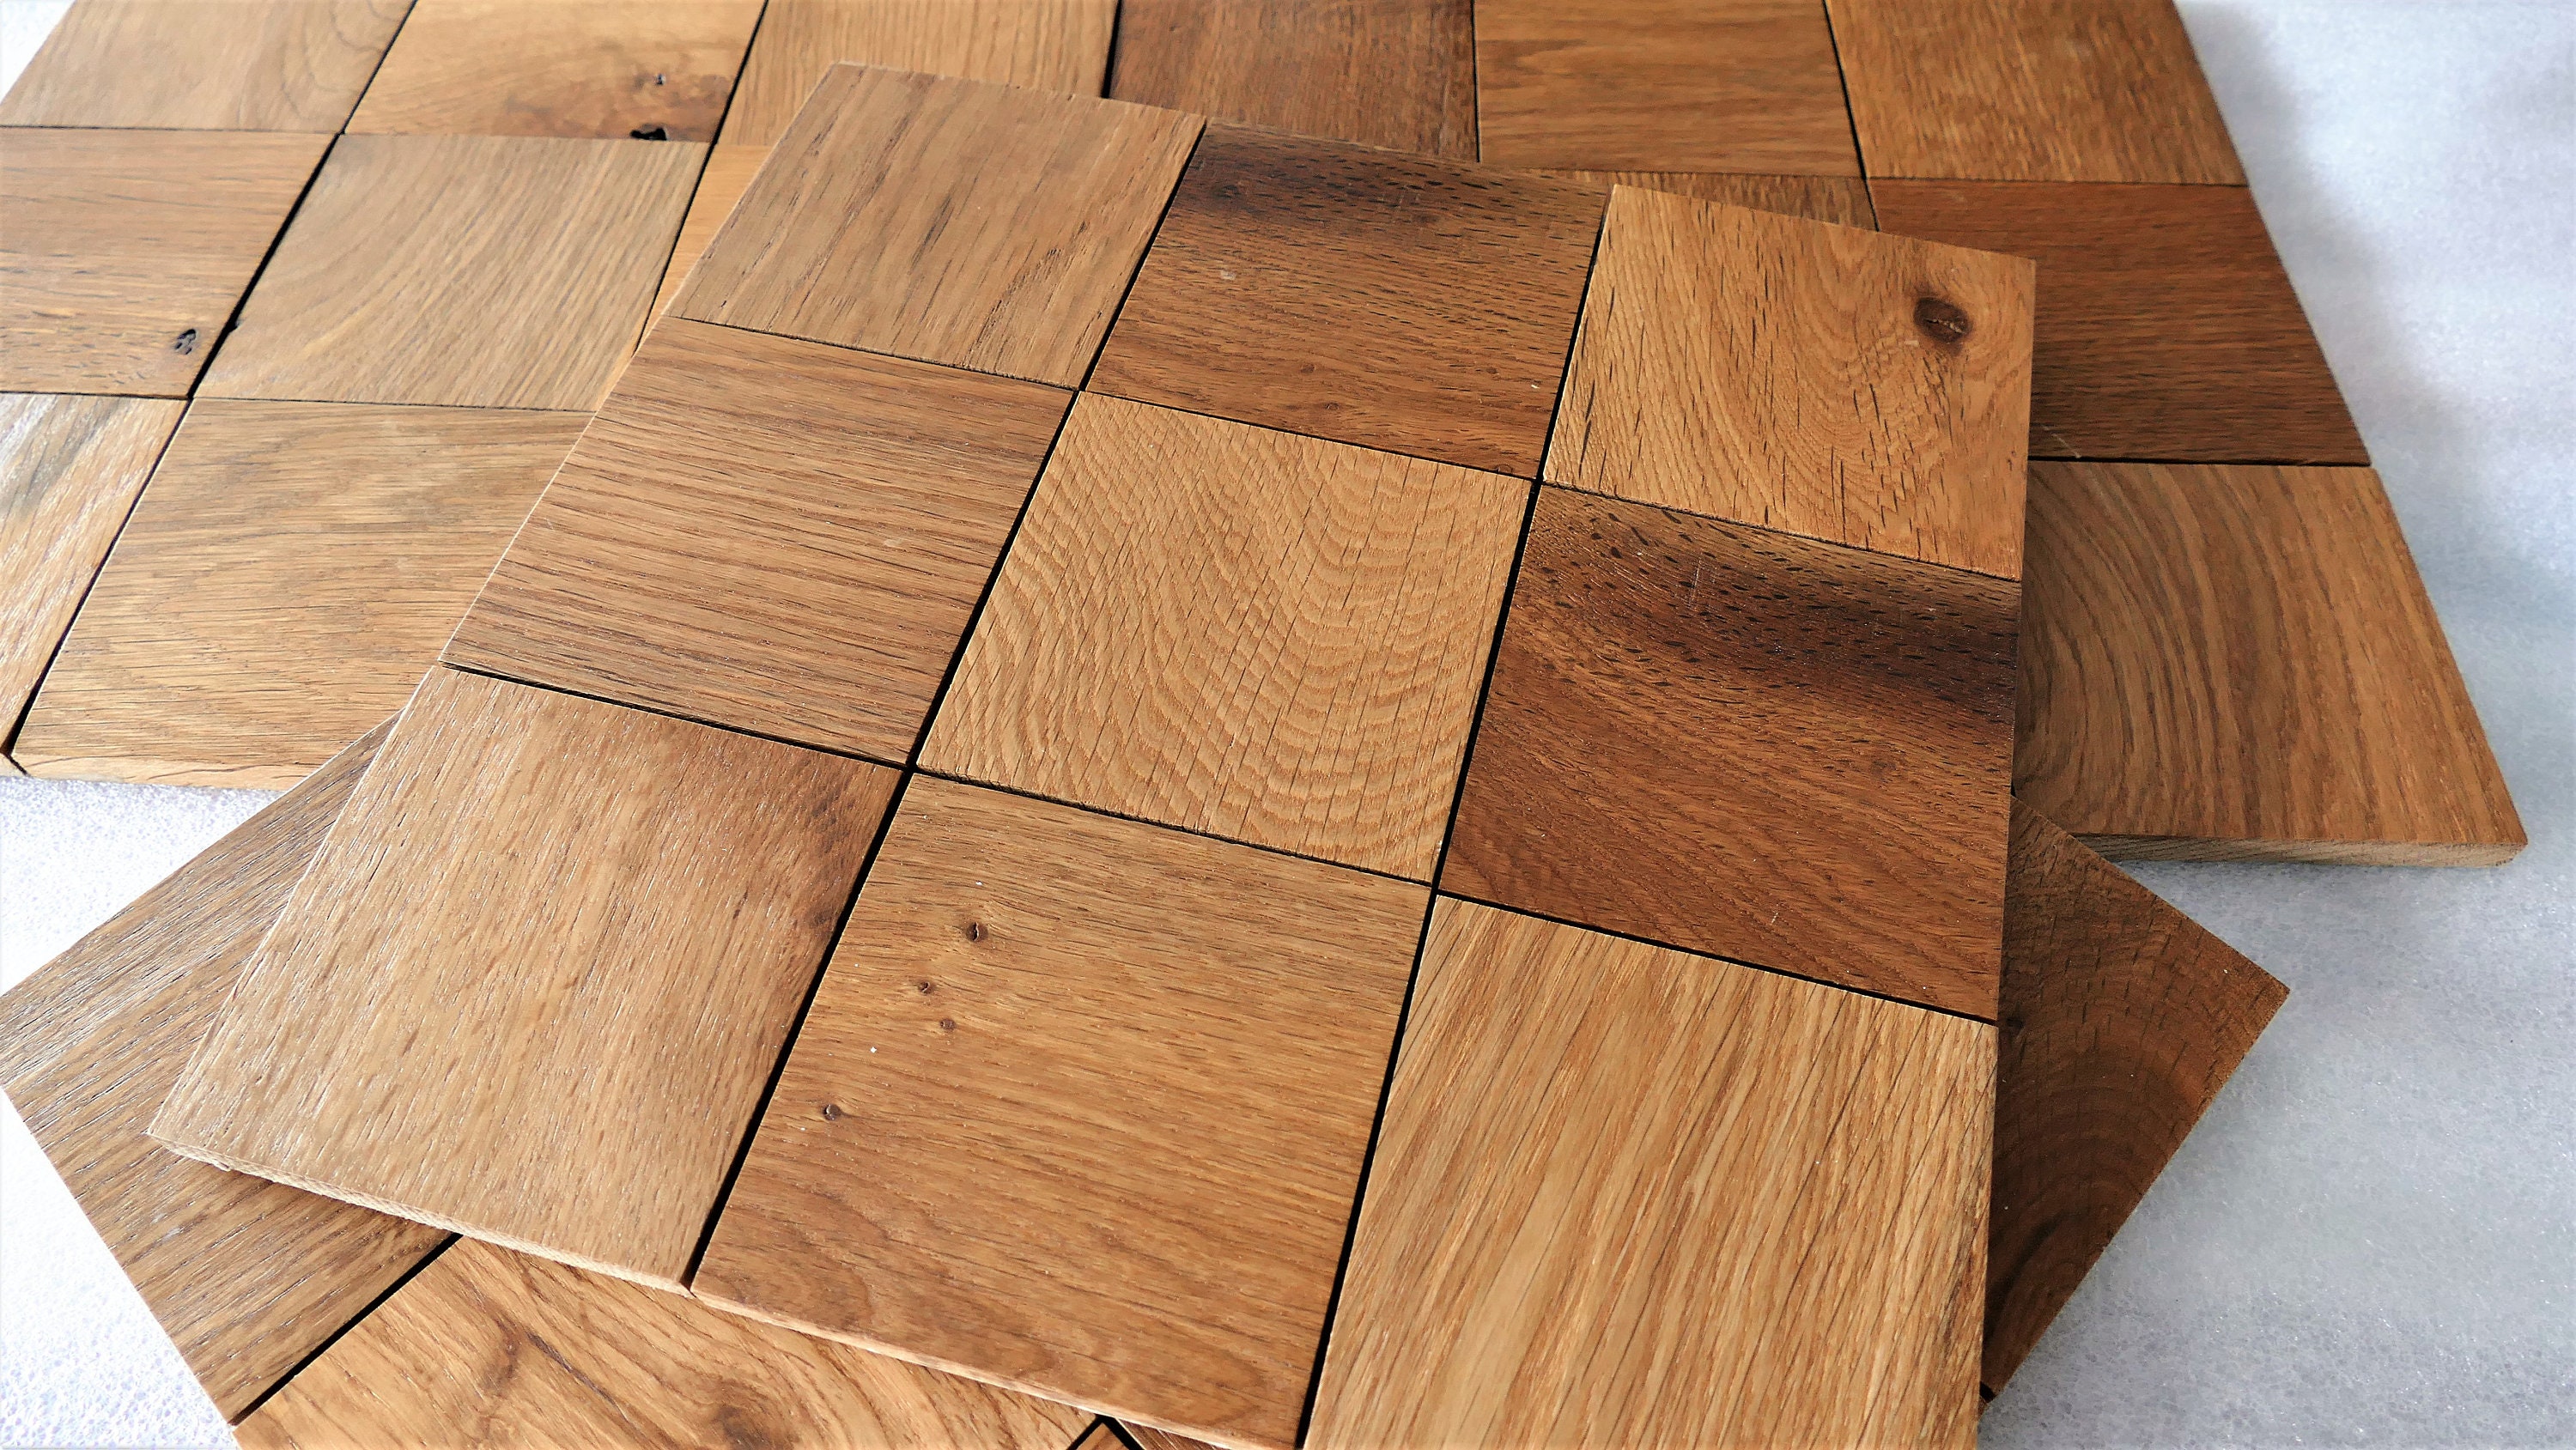 FLAT SQUARE - Wood tiles from Form at Wood